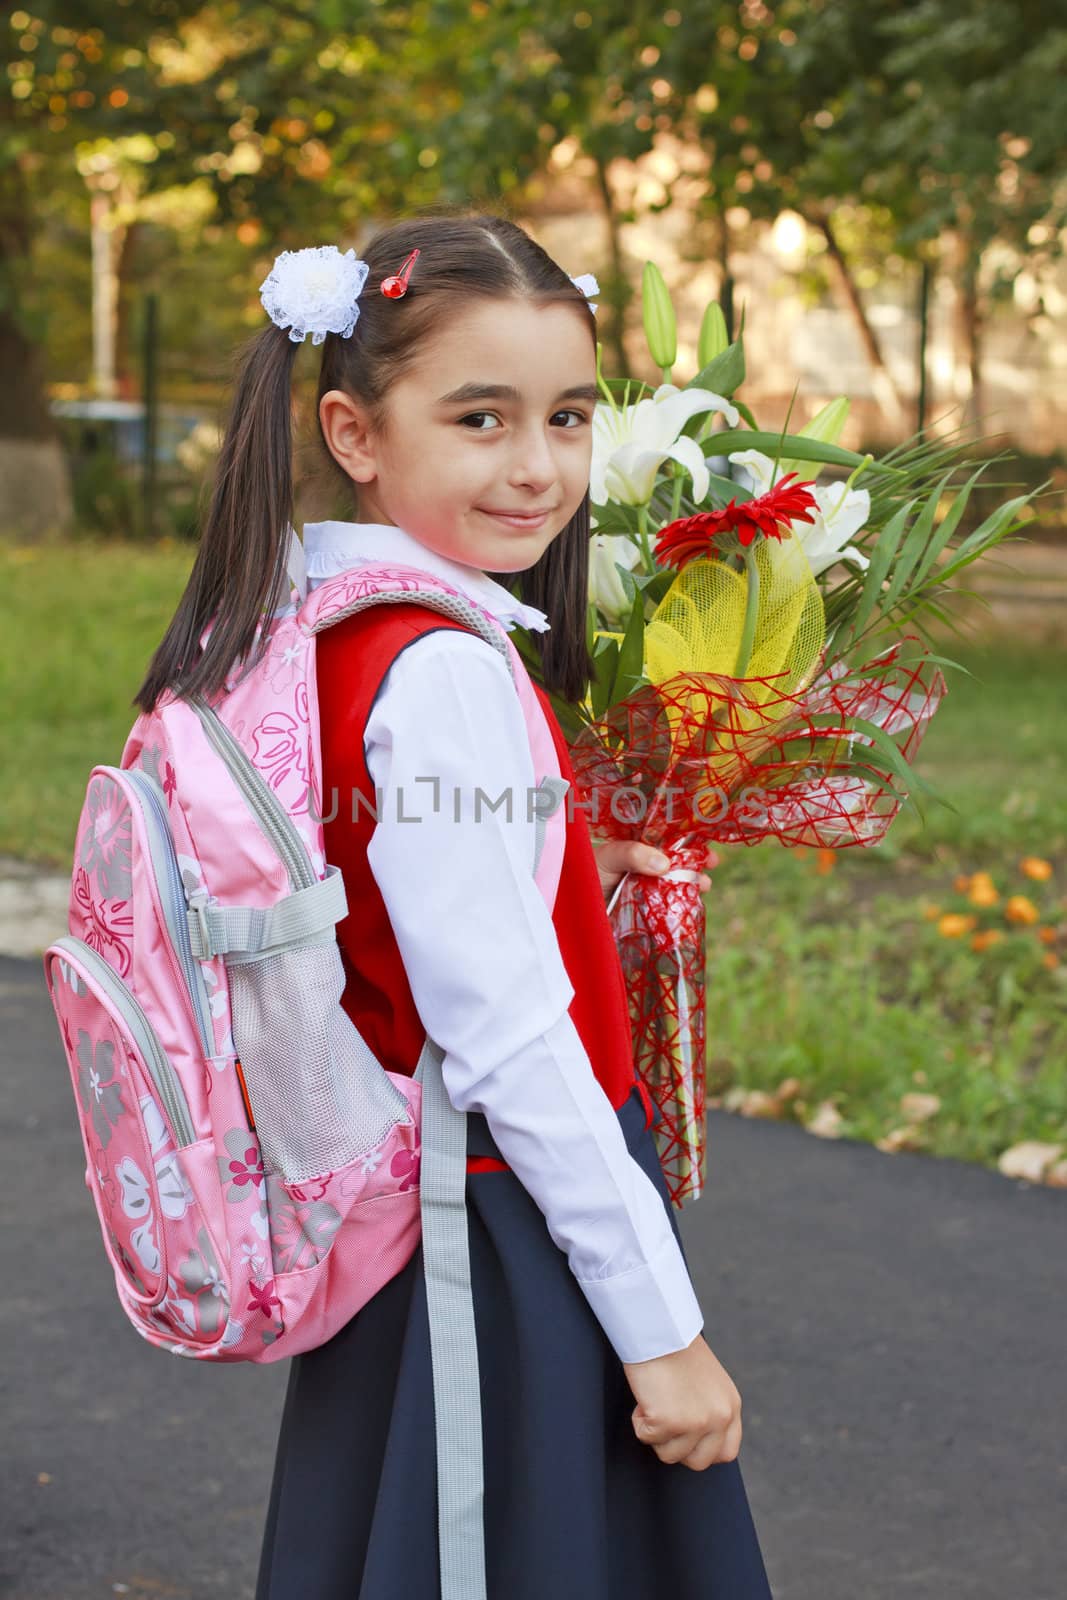 A little girl on her way to school